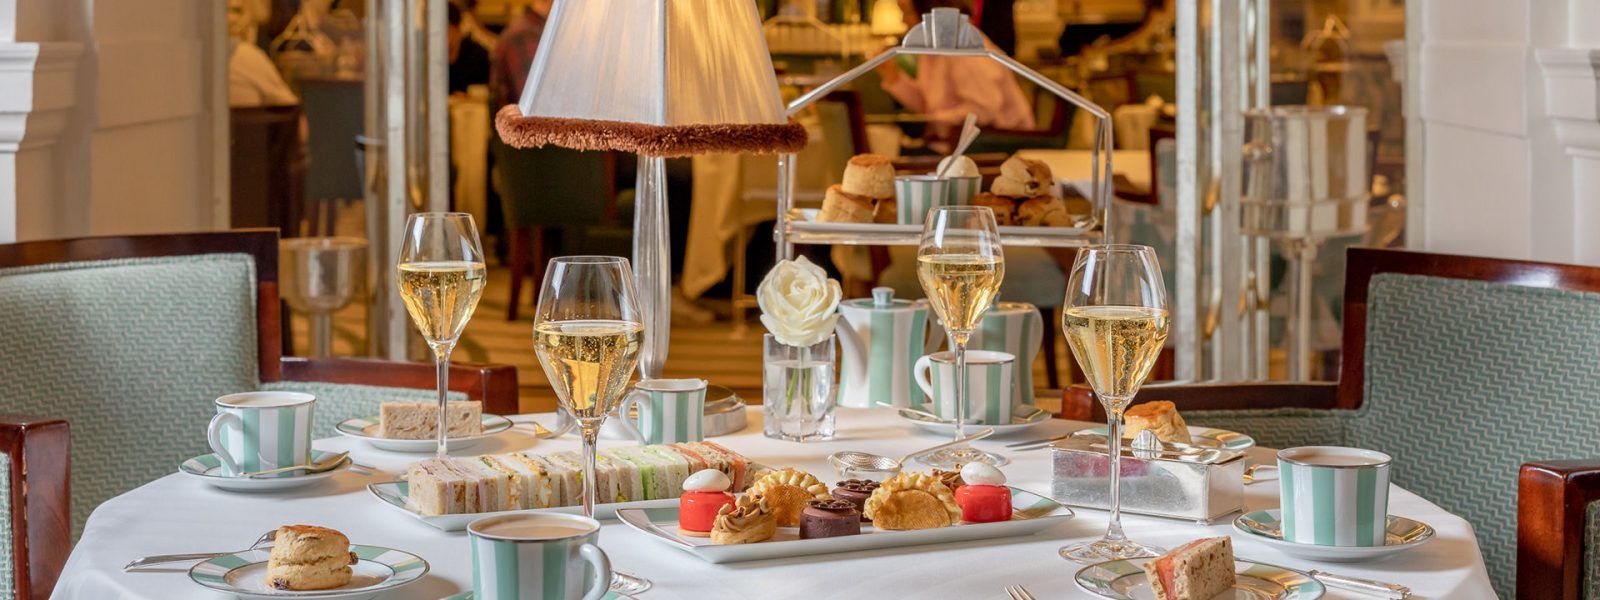 Here’s a complete guide to afternoon tea etiquette